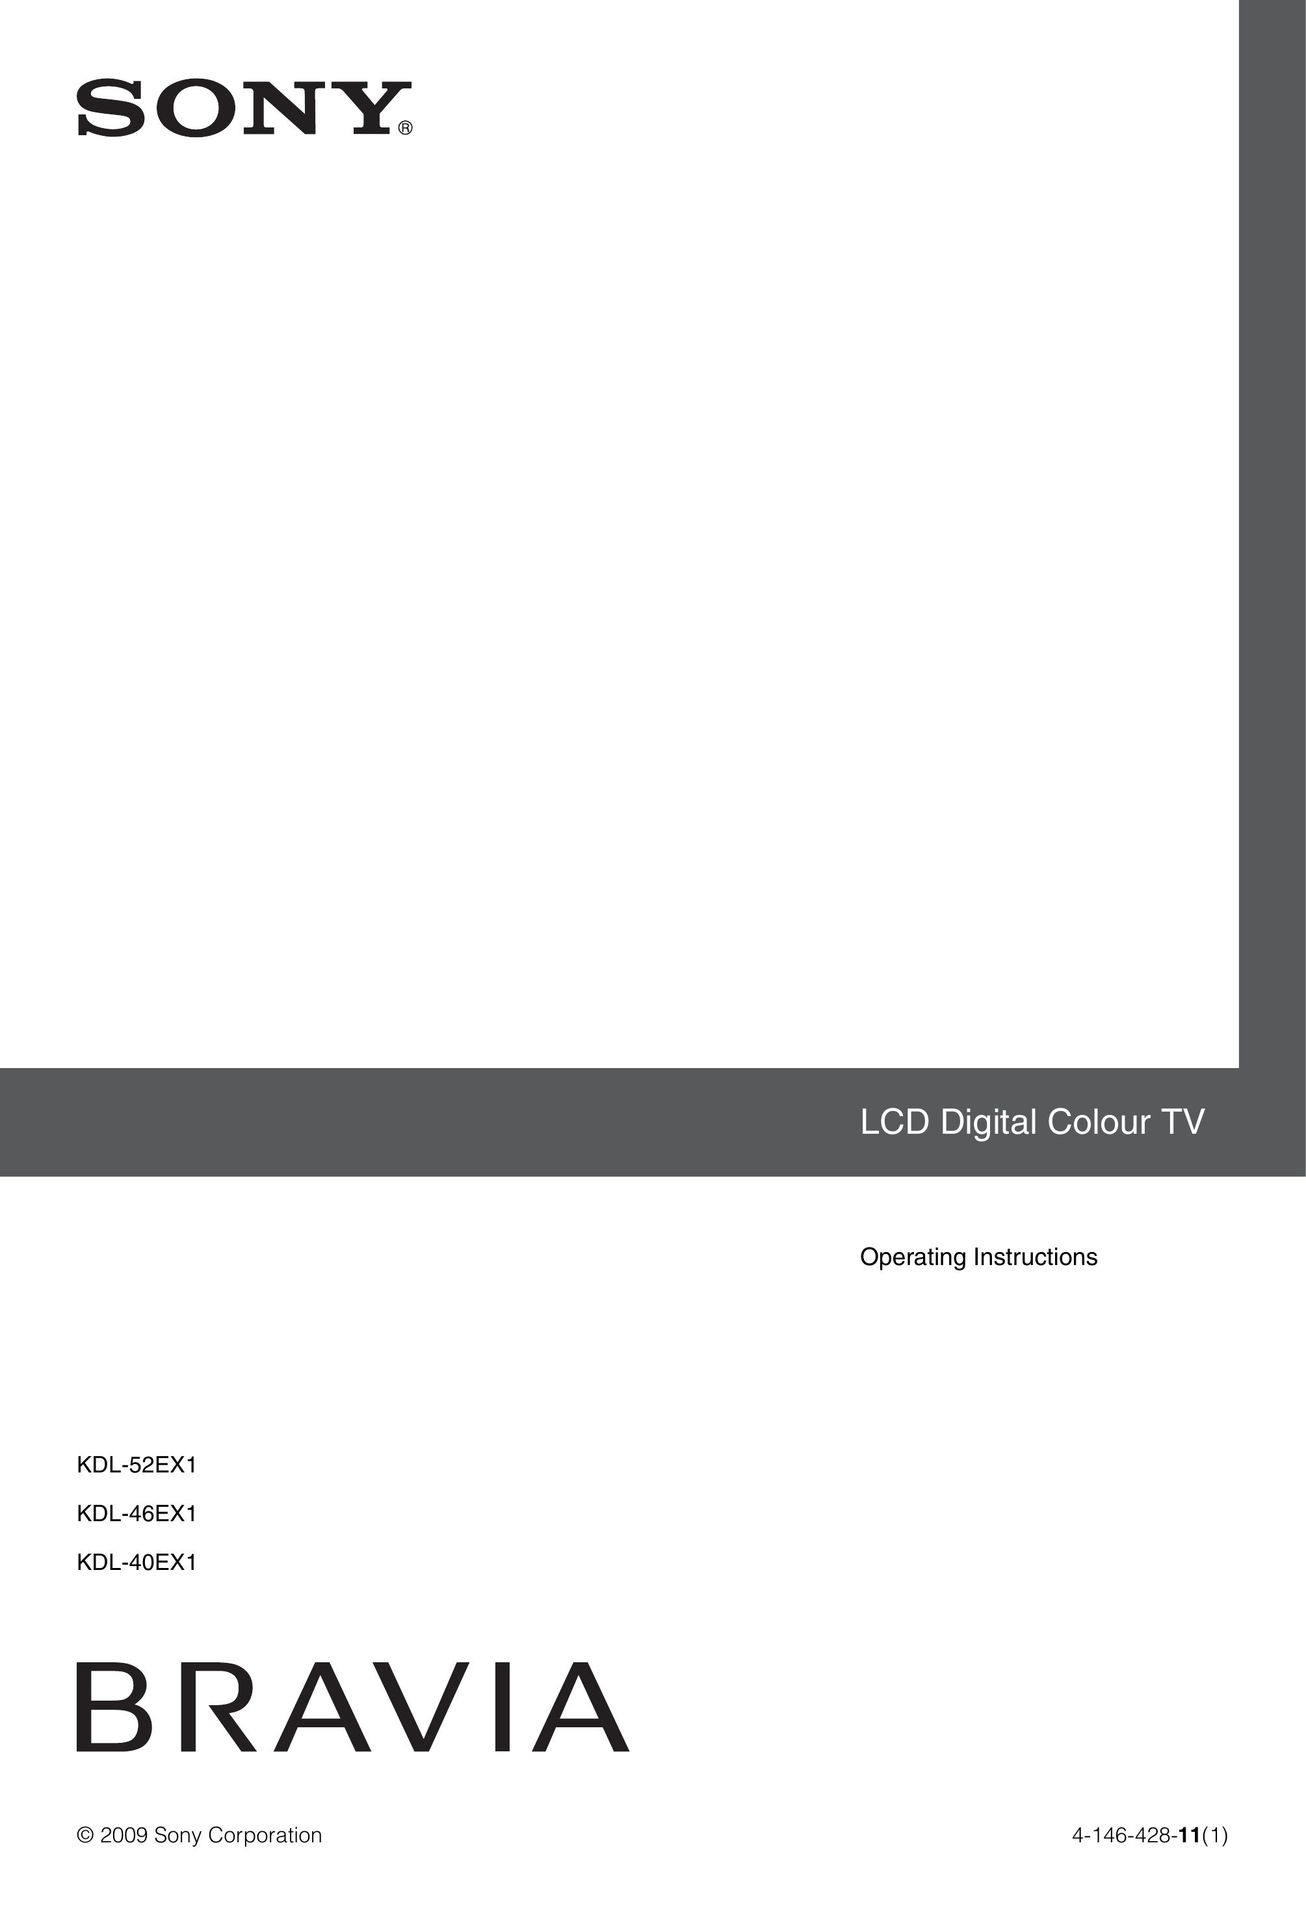 Sony 4-146-428-11(1) Flat Panel Television User Manual